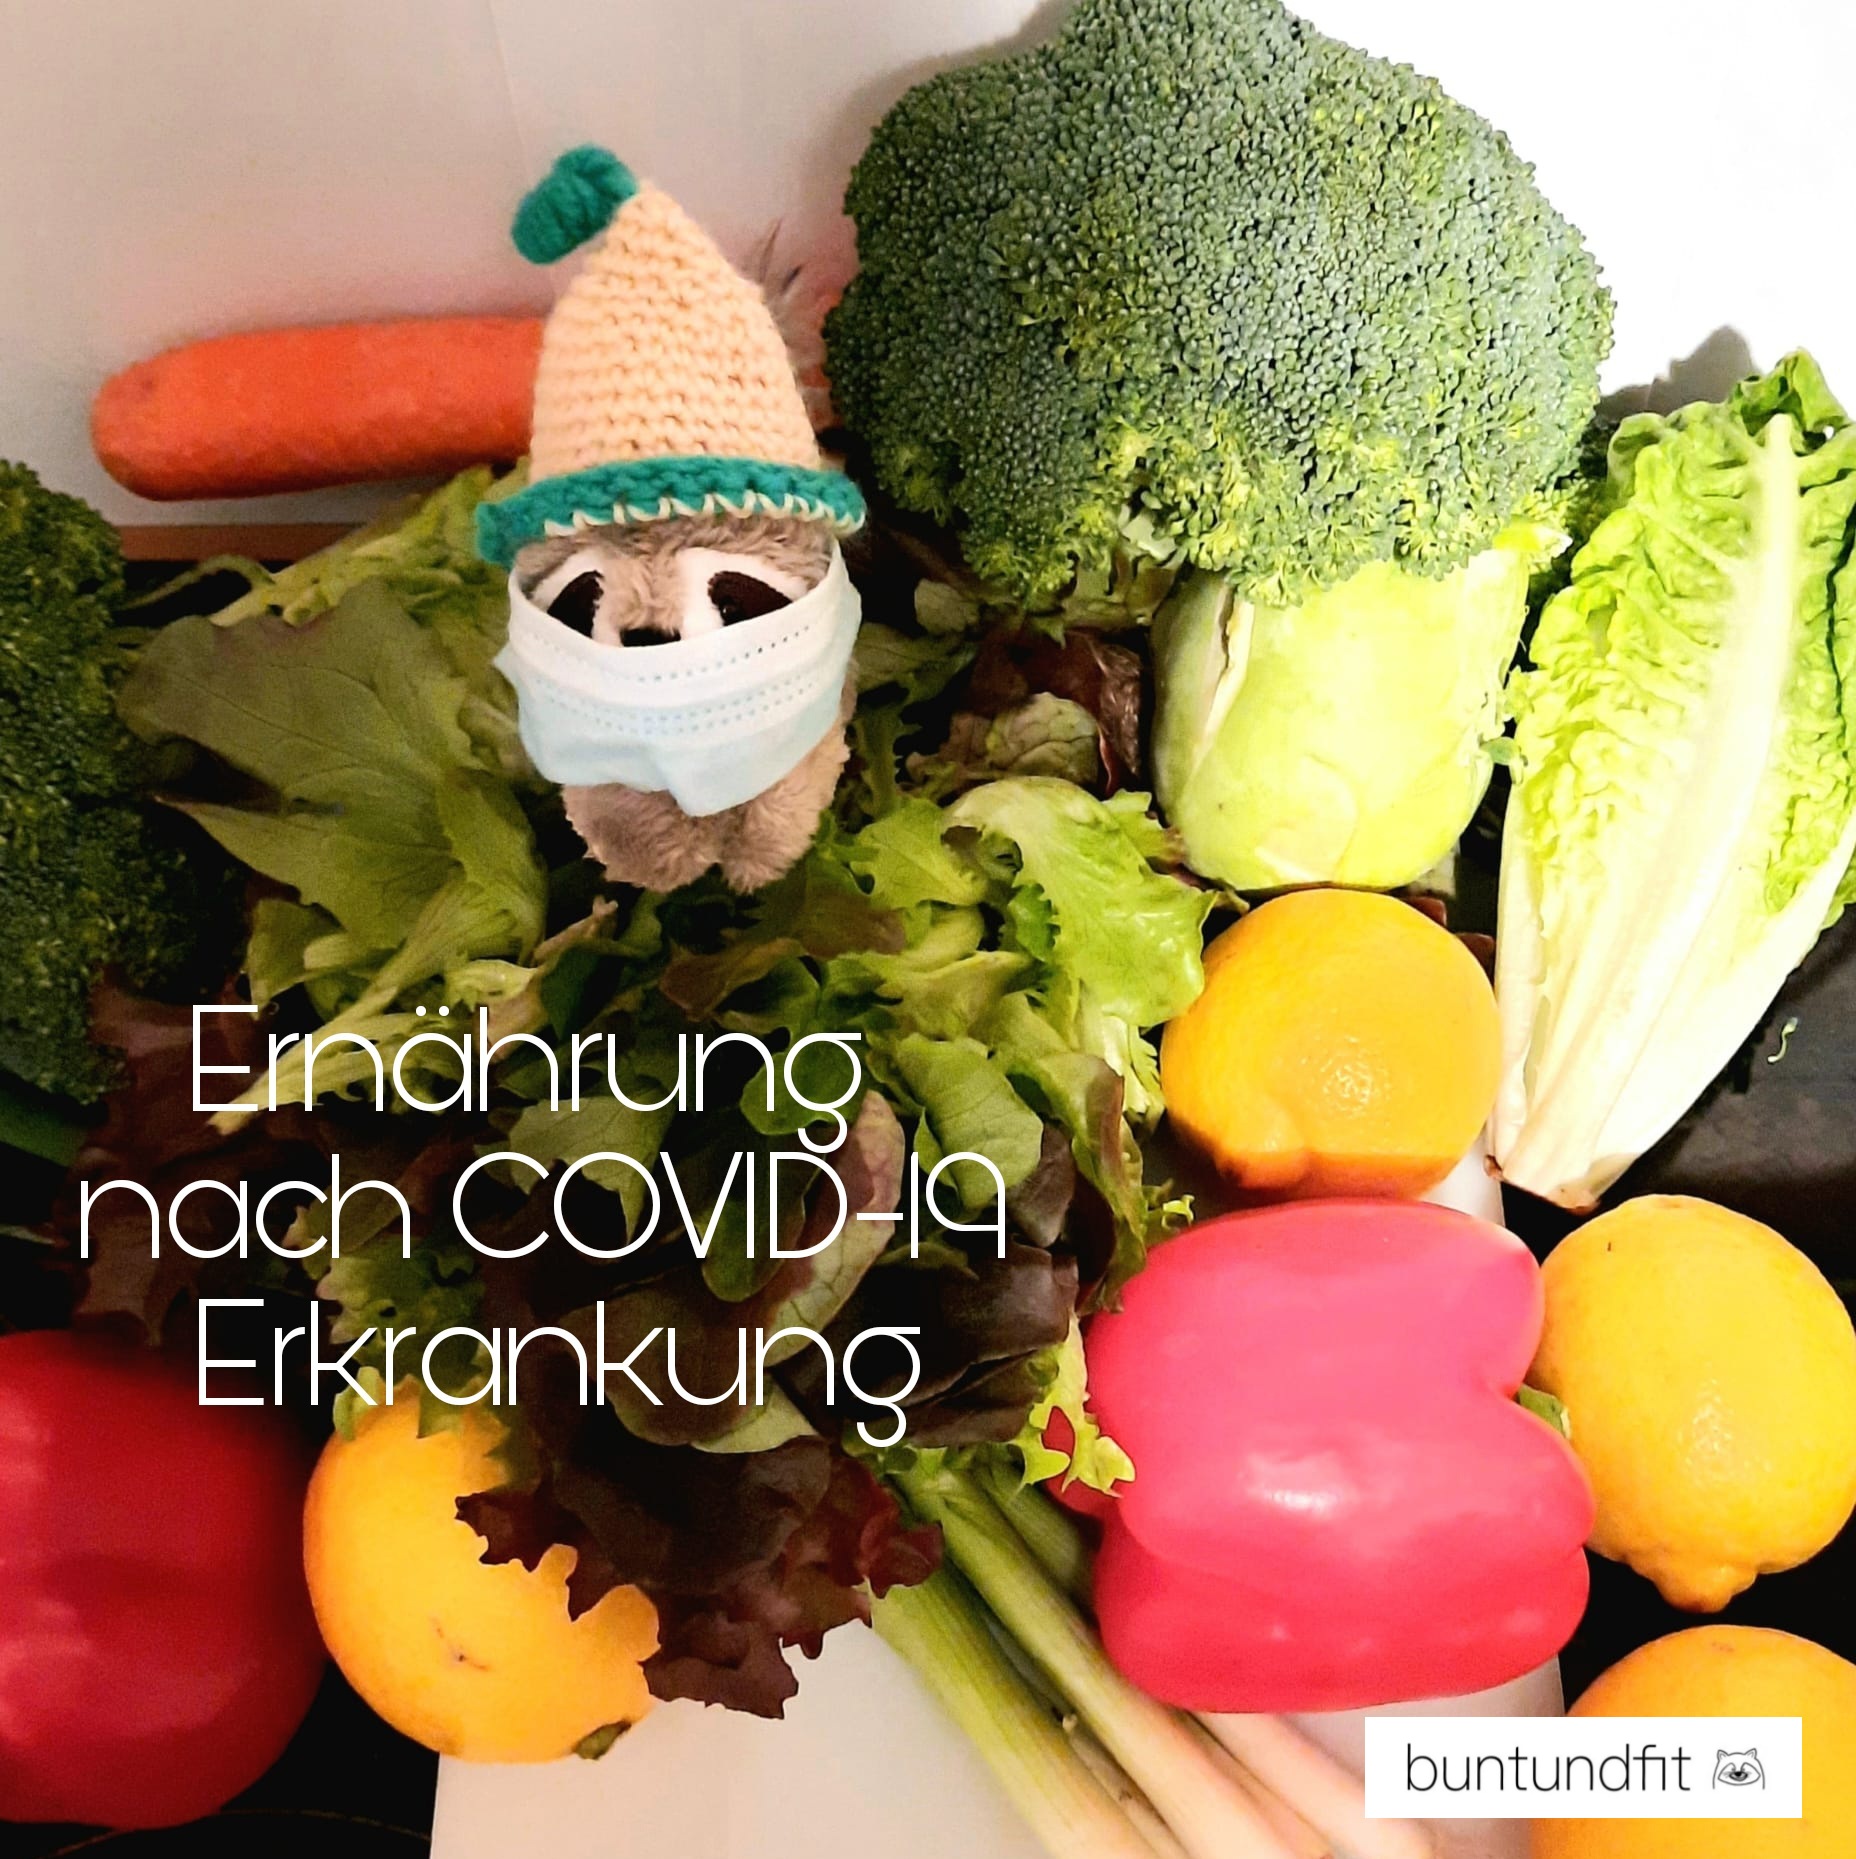 You are currently viewing Ernährung nach COVID-19 Erkrankung